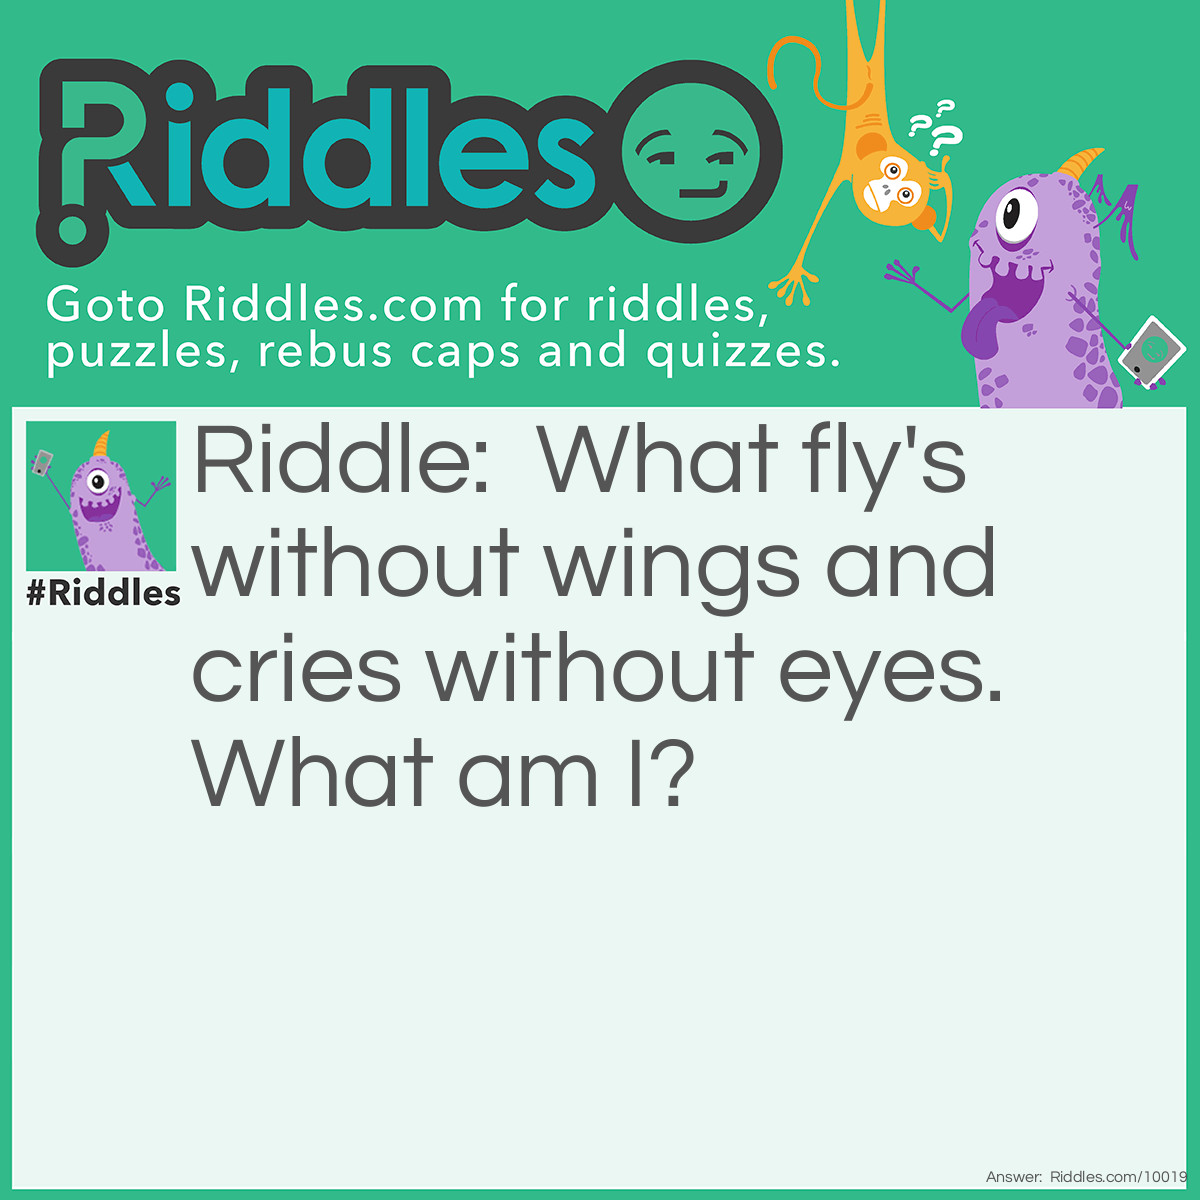 Riddle: What fly's without wings and cries without eyes. What am I? Answer: A cloud.